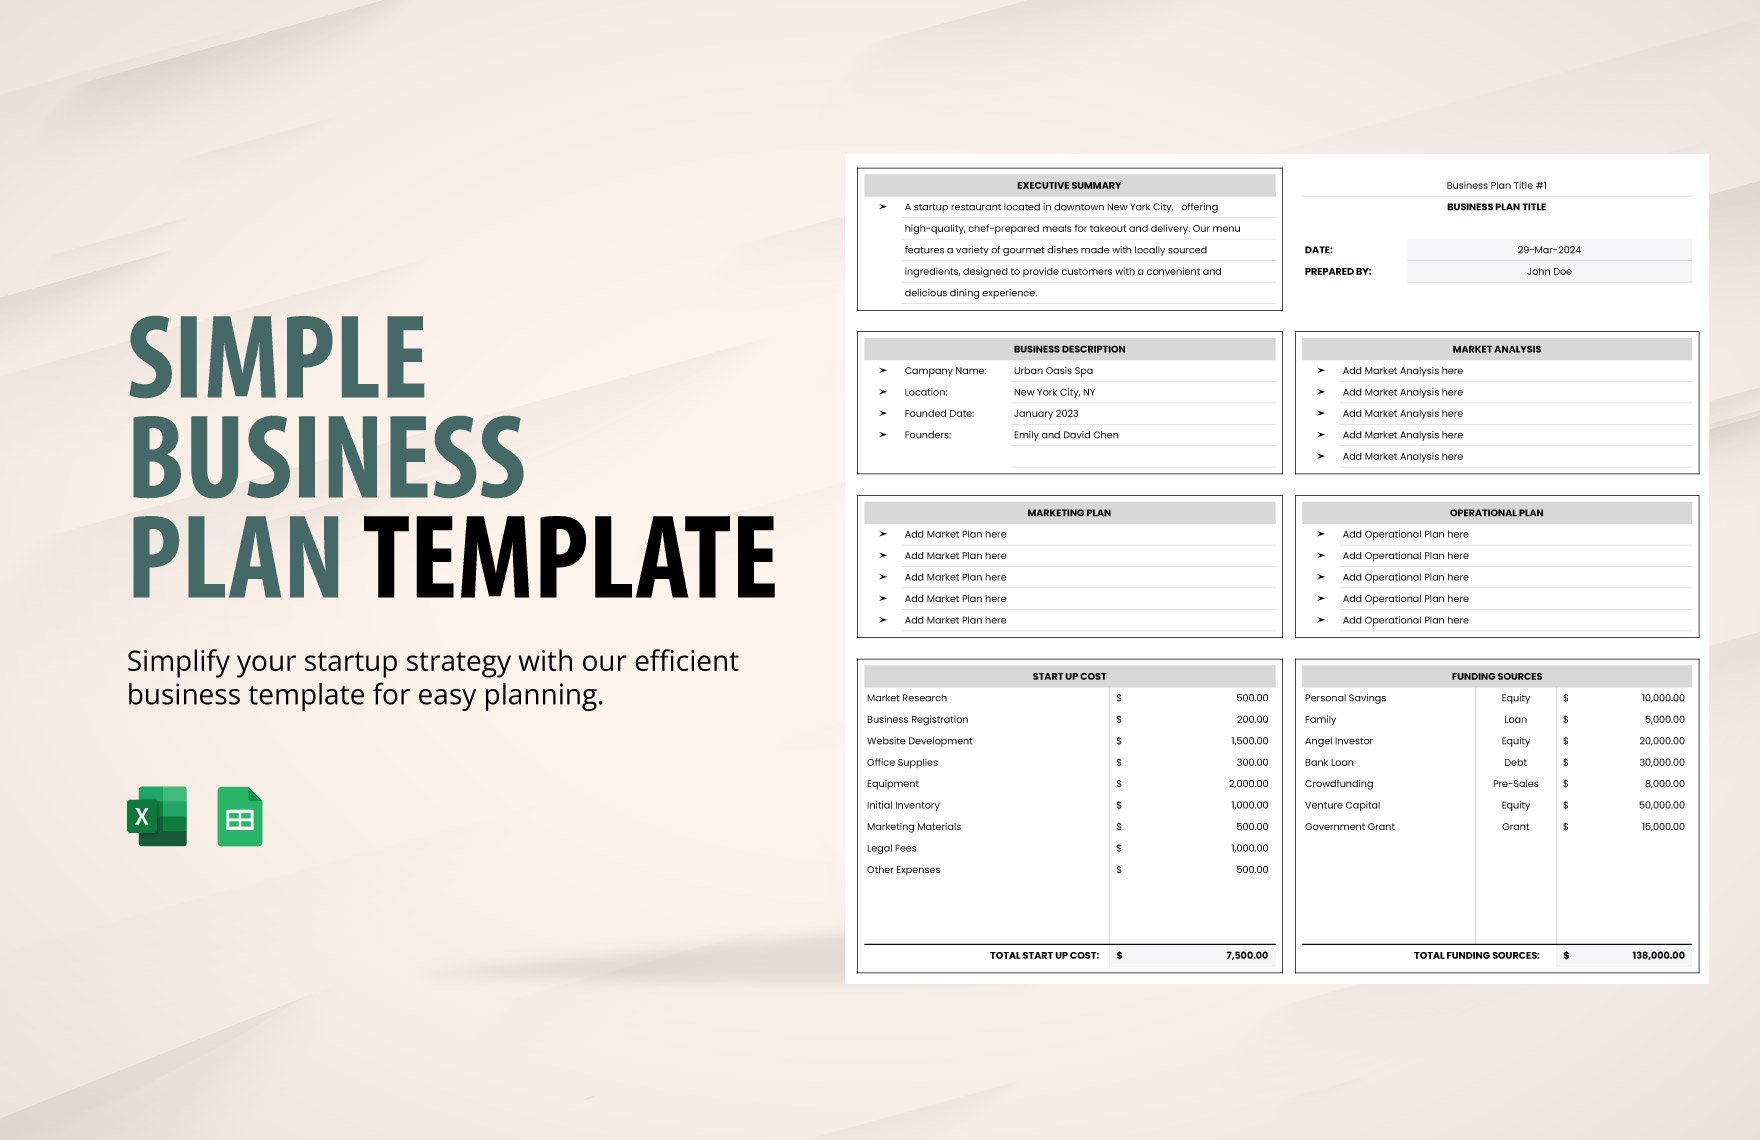 Simple Business Plan Template in Excel, Google Sheets